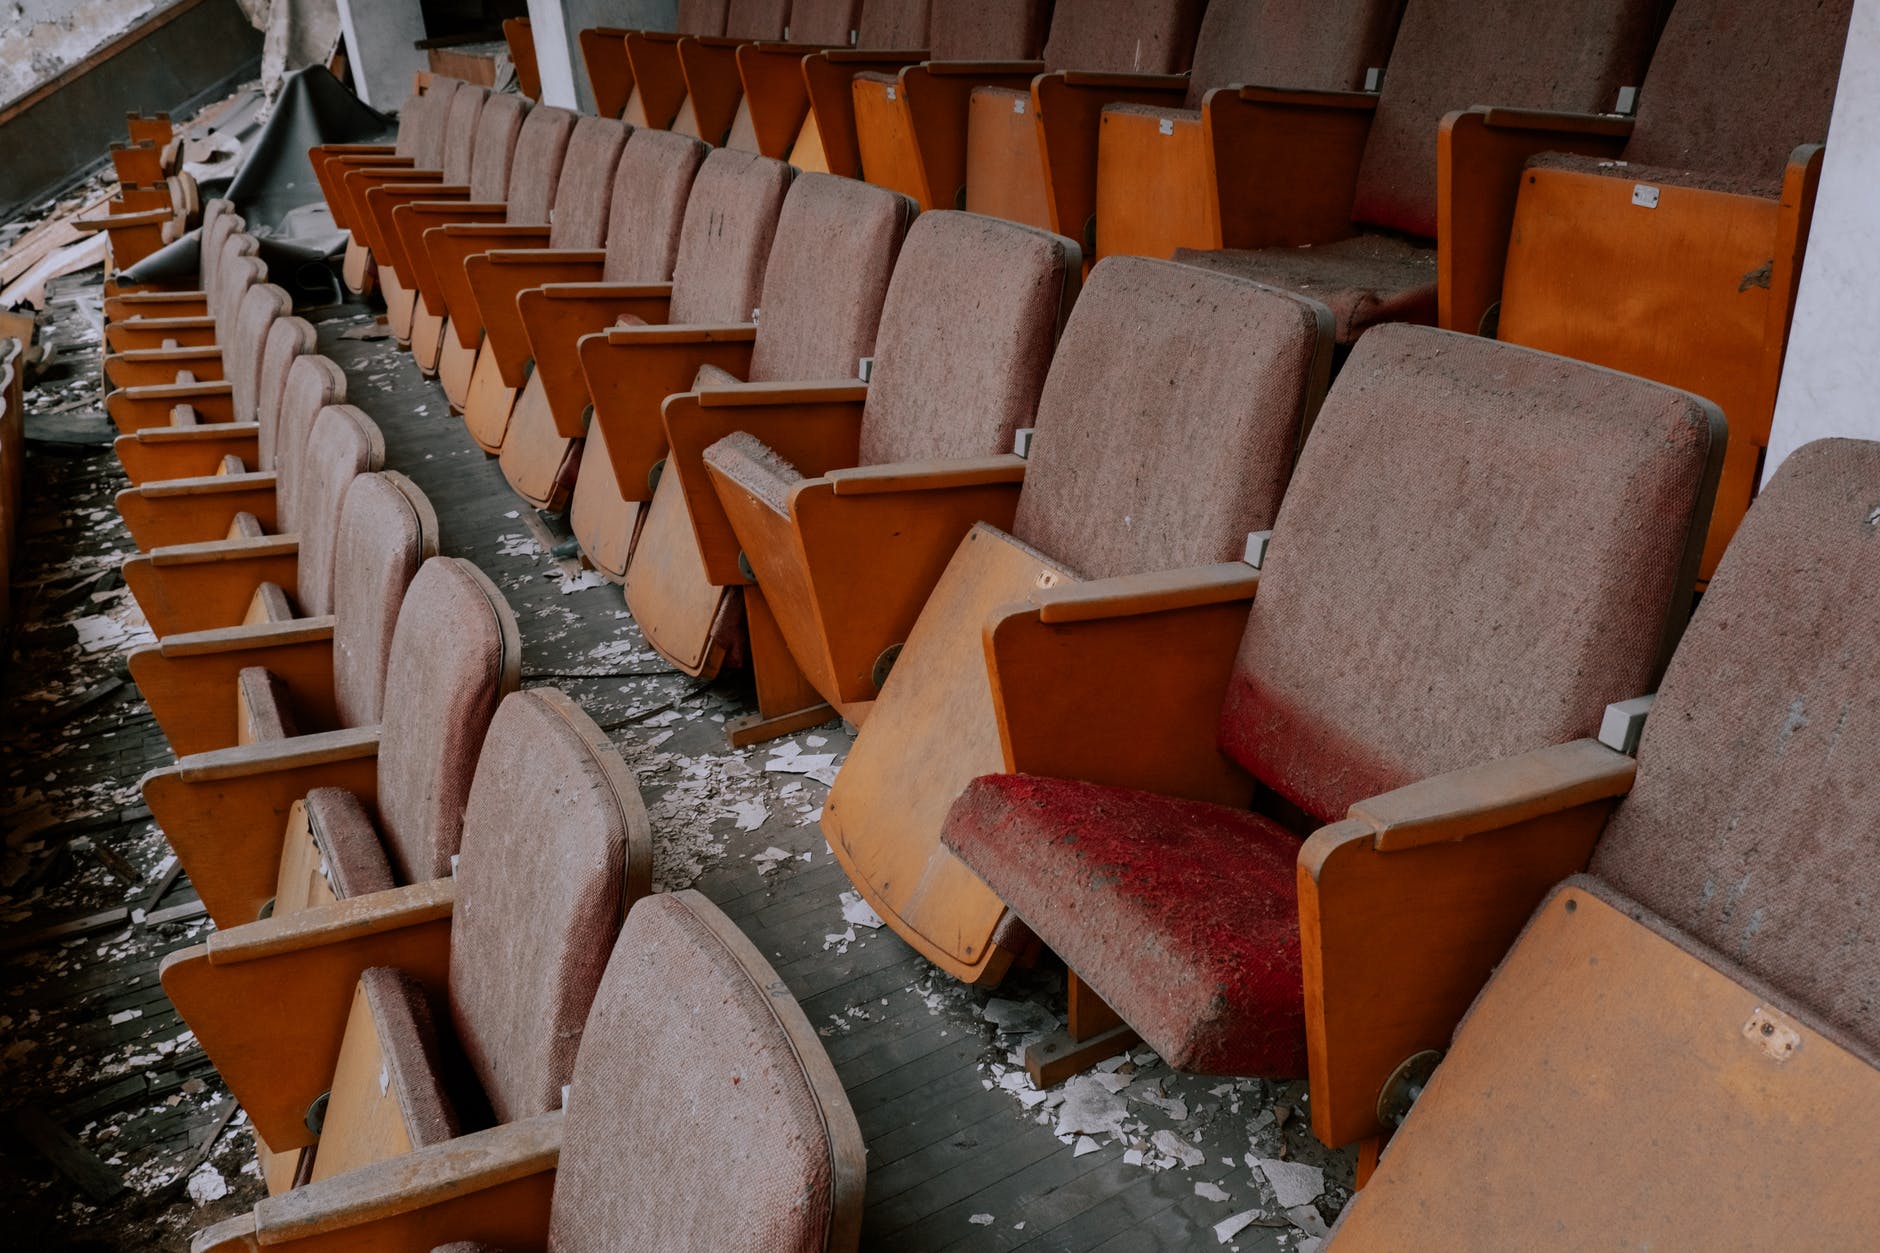 abandoned cinema with broken chairs